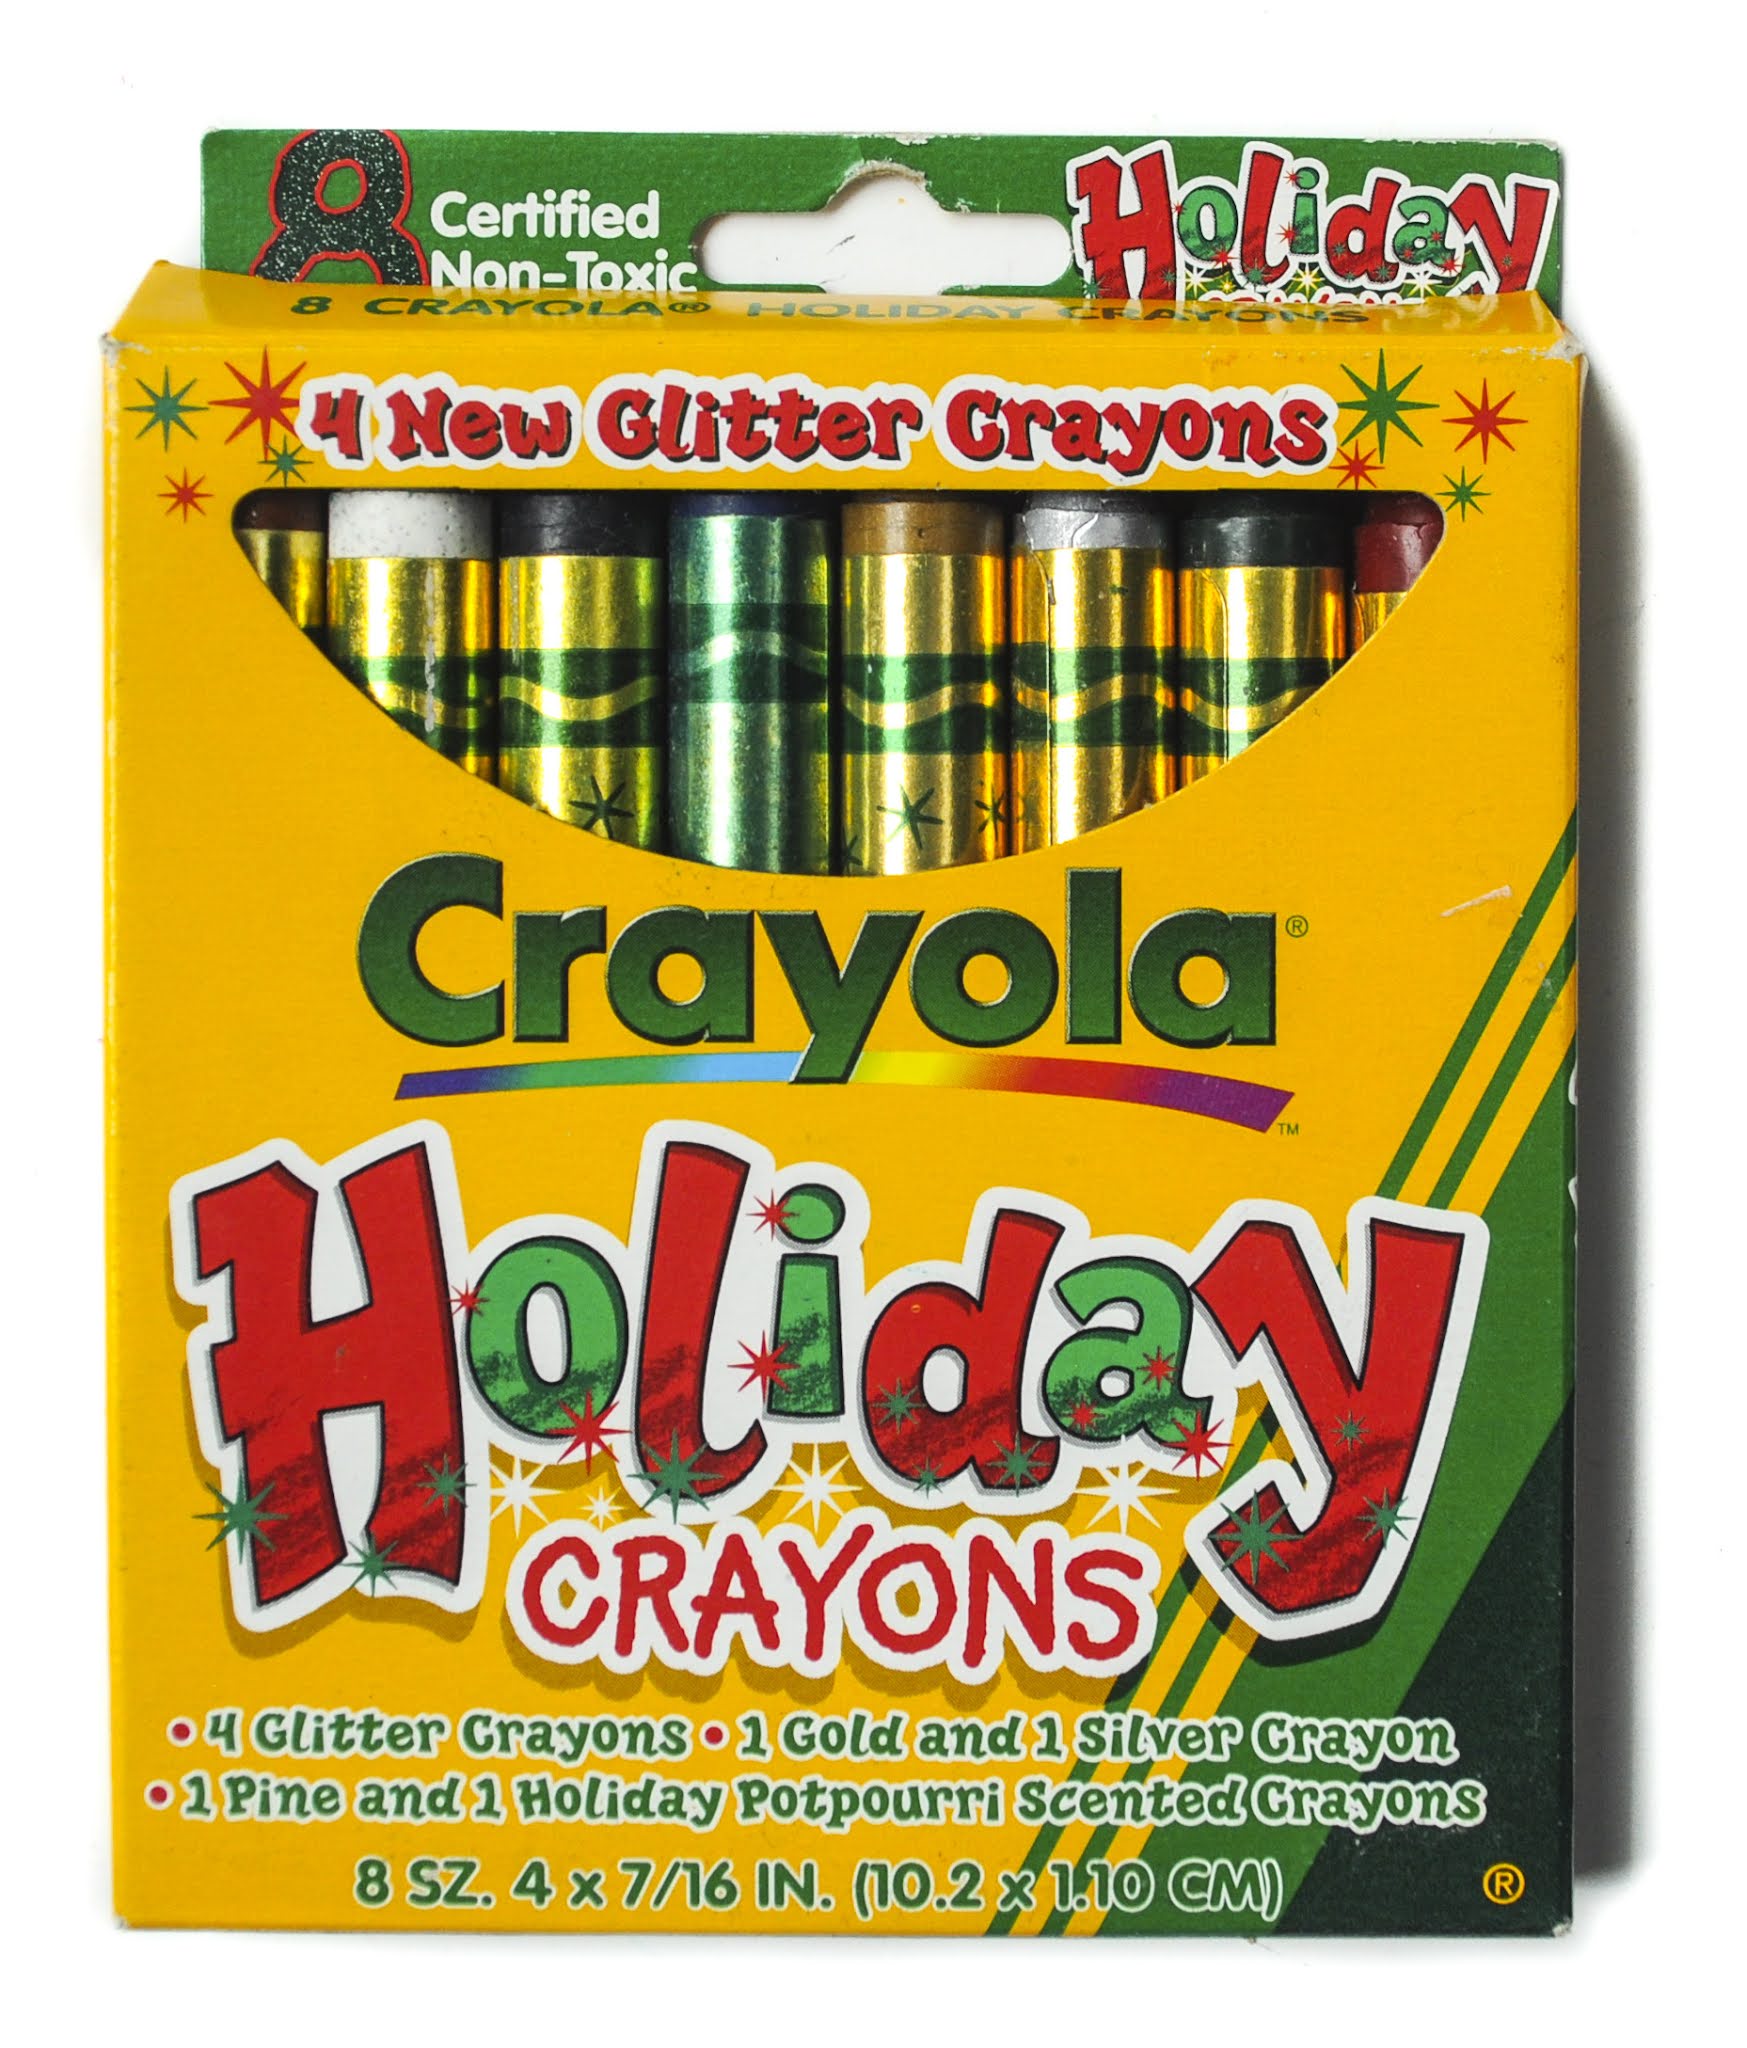 Crayola Color Switchers and Over Writers Markers: What's Inside